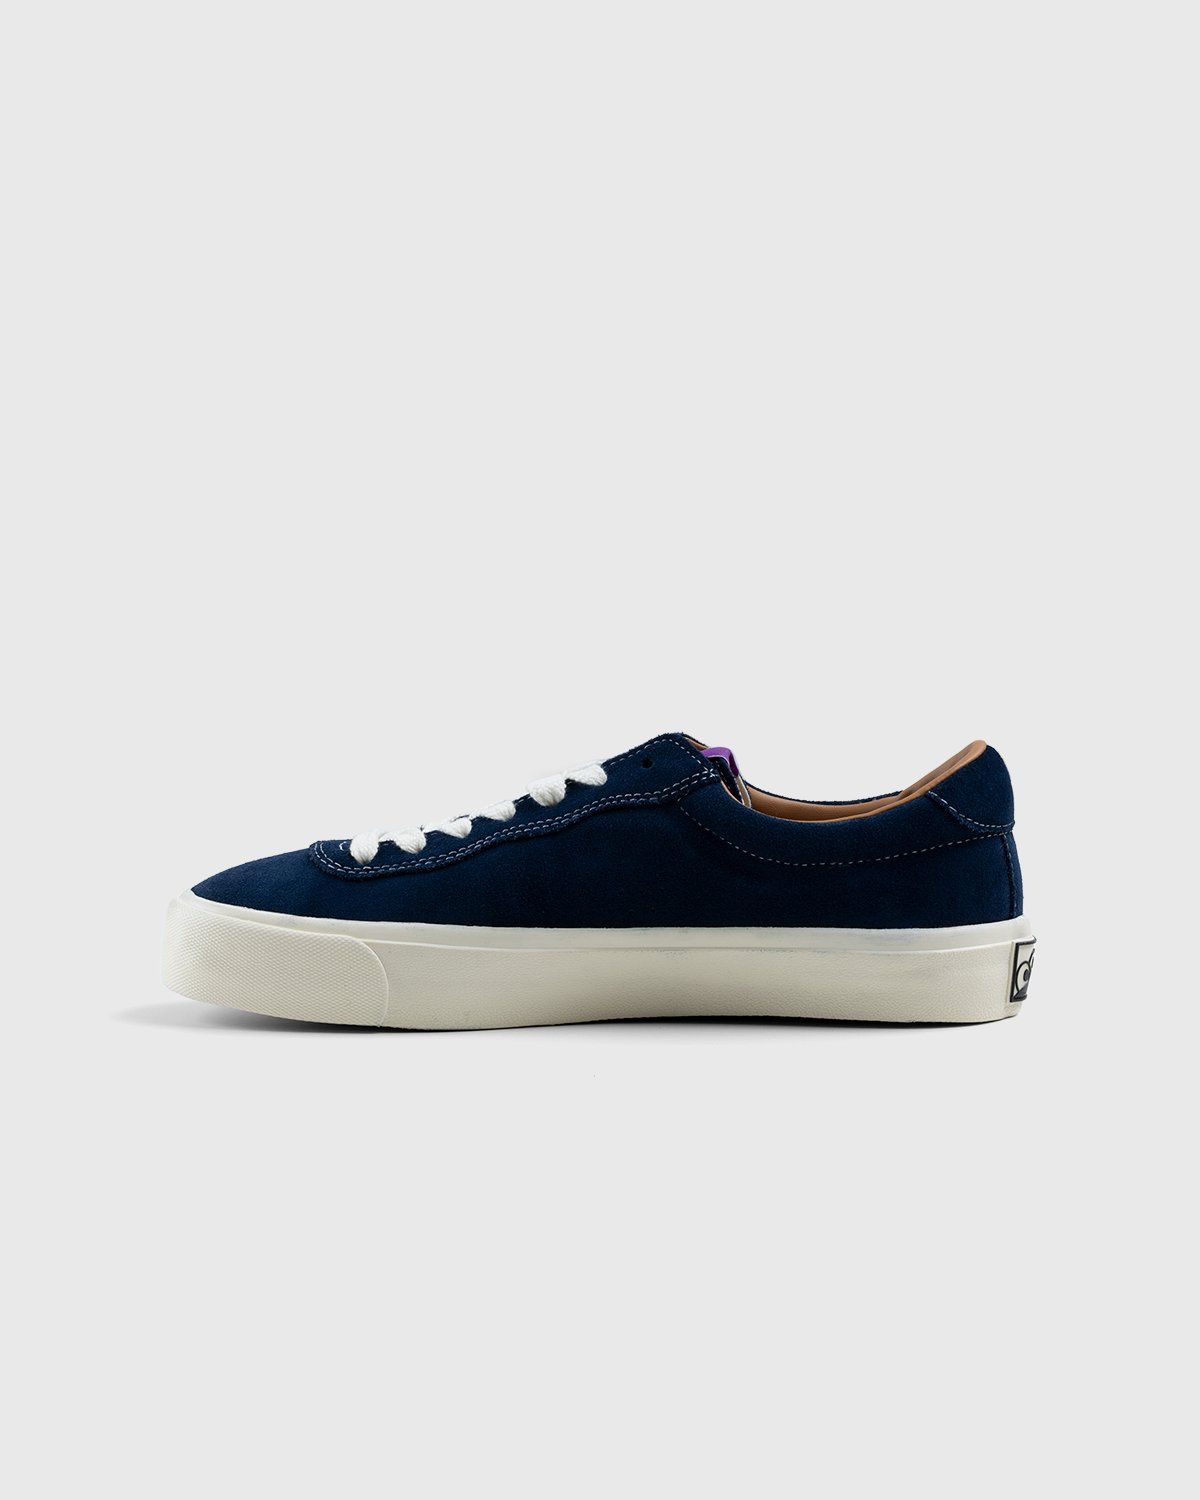 Last Resort AB – VM001 Lo Suede Old Blue/White - Sneakers - Blue - Image 2